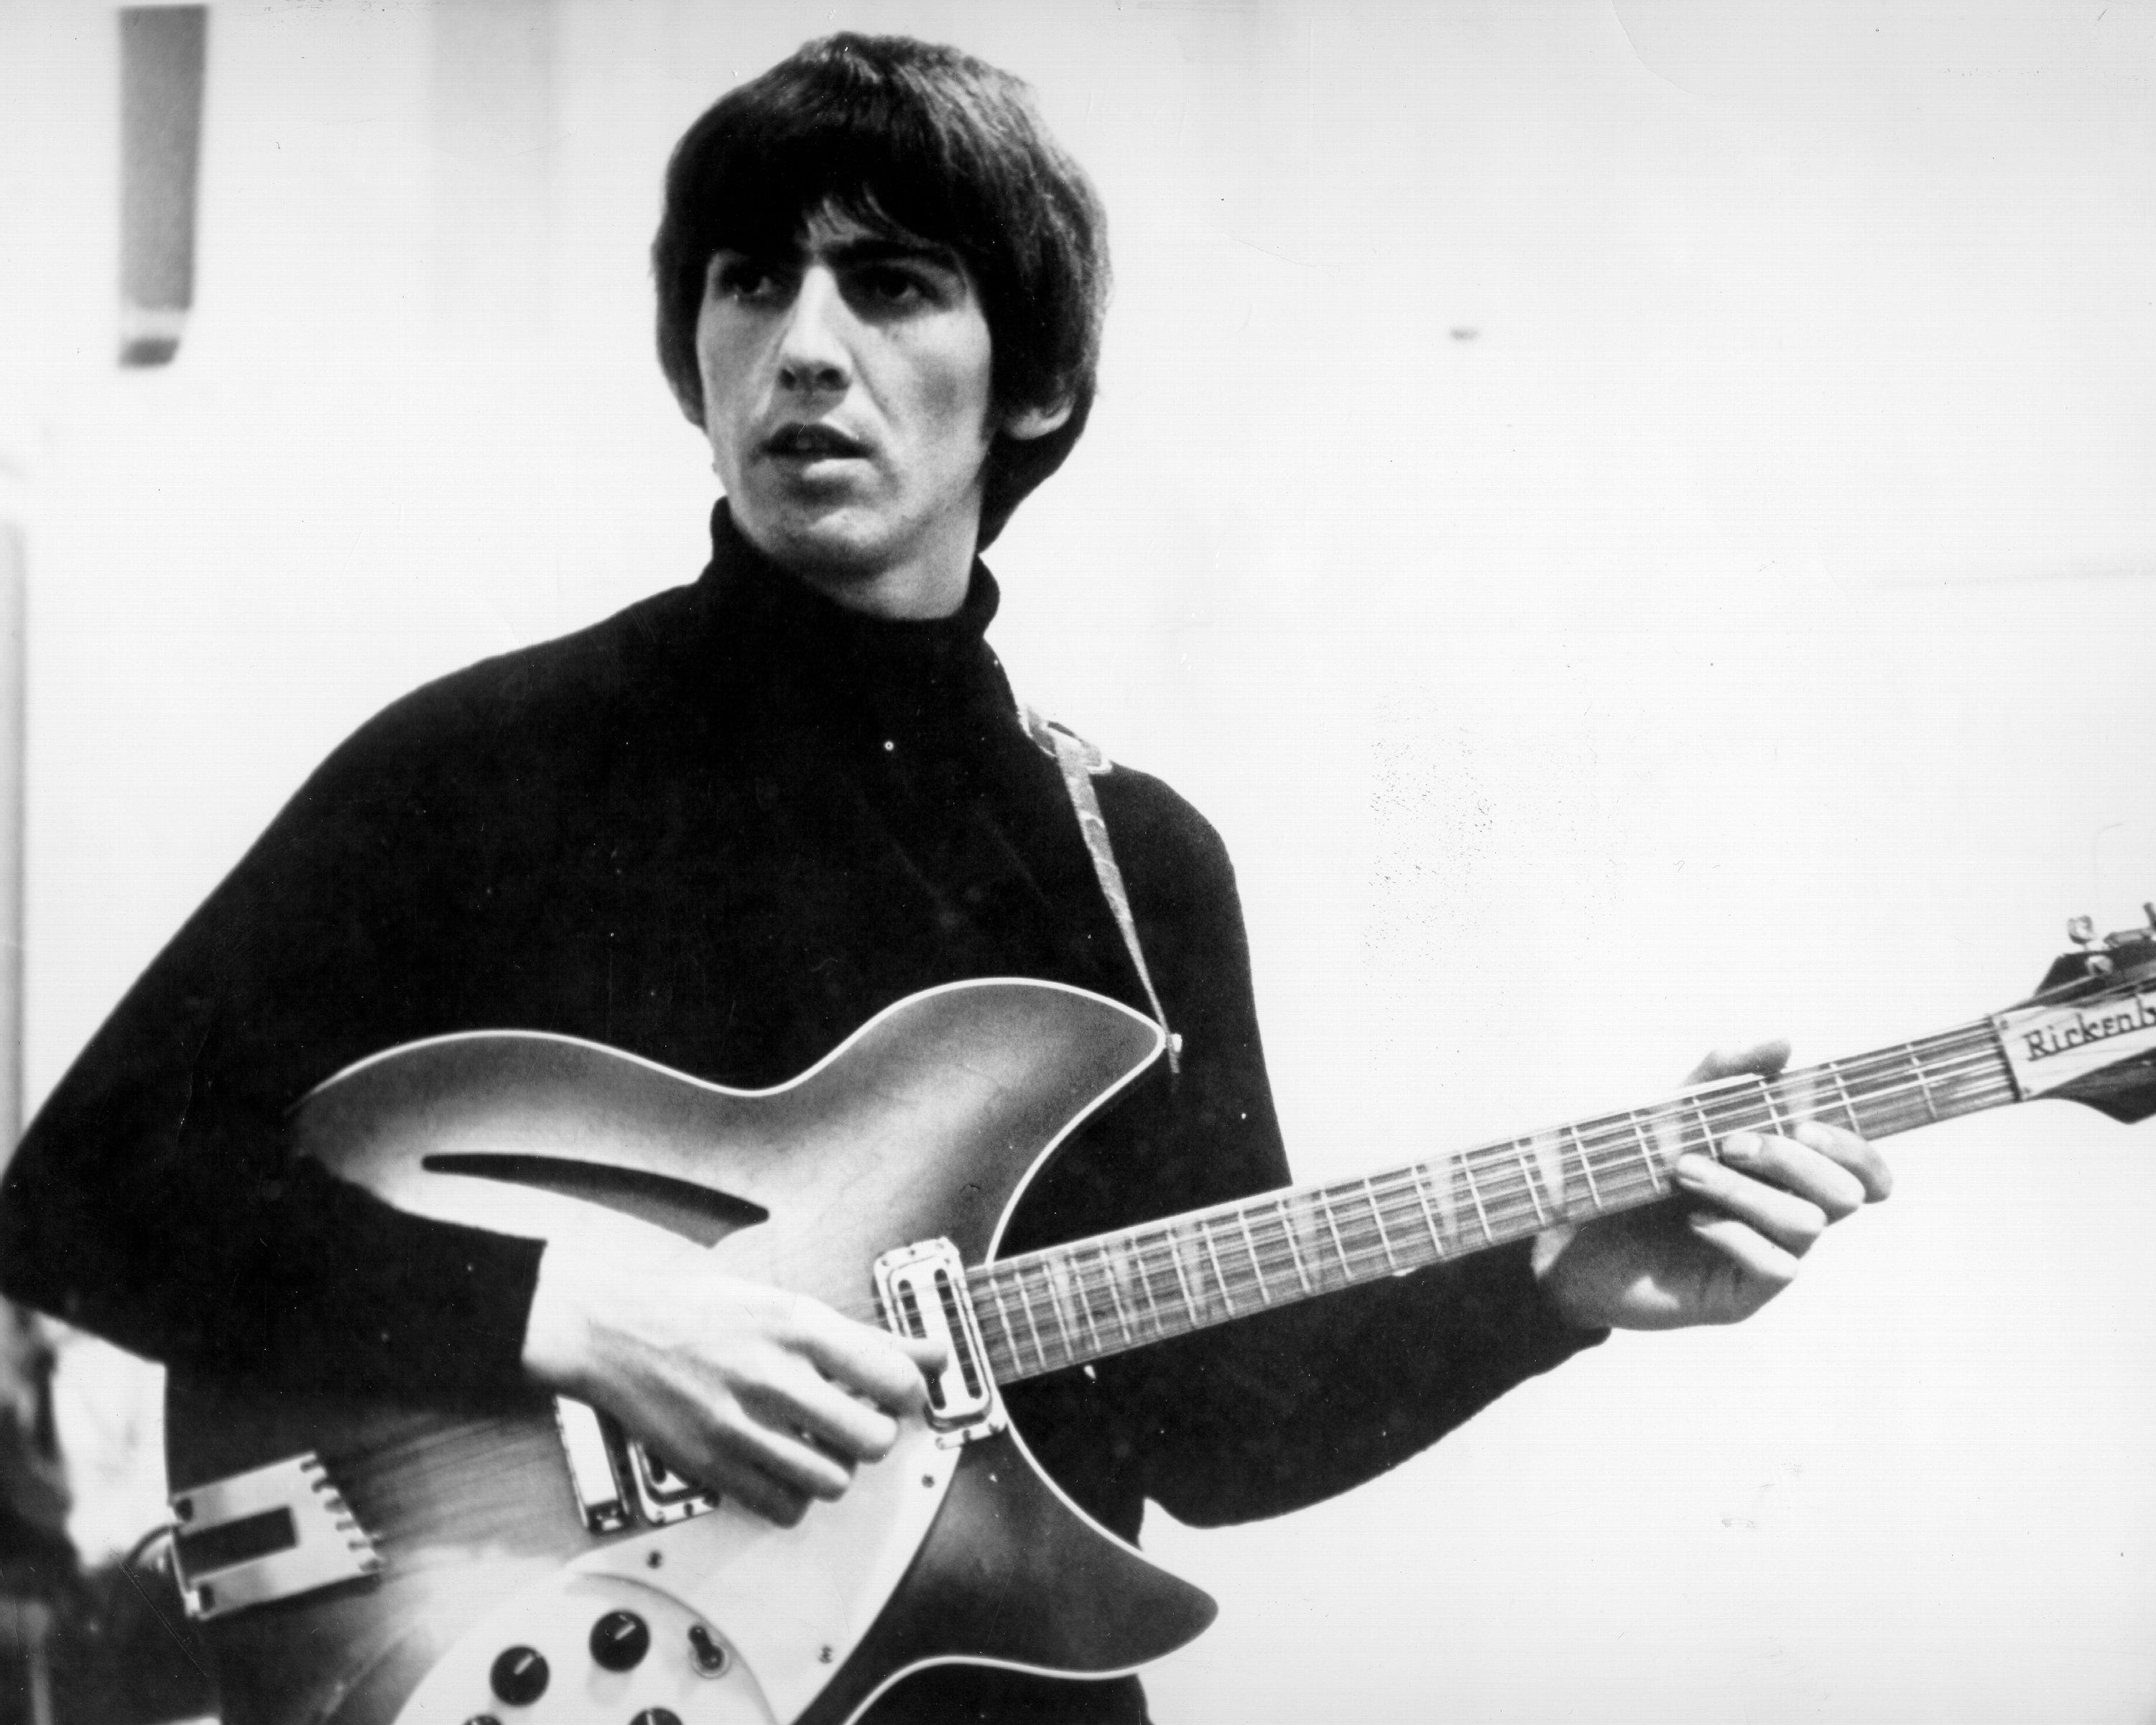 George Harrison of The Beatles holding a guitar